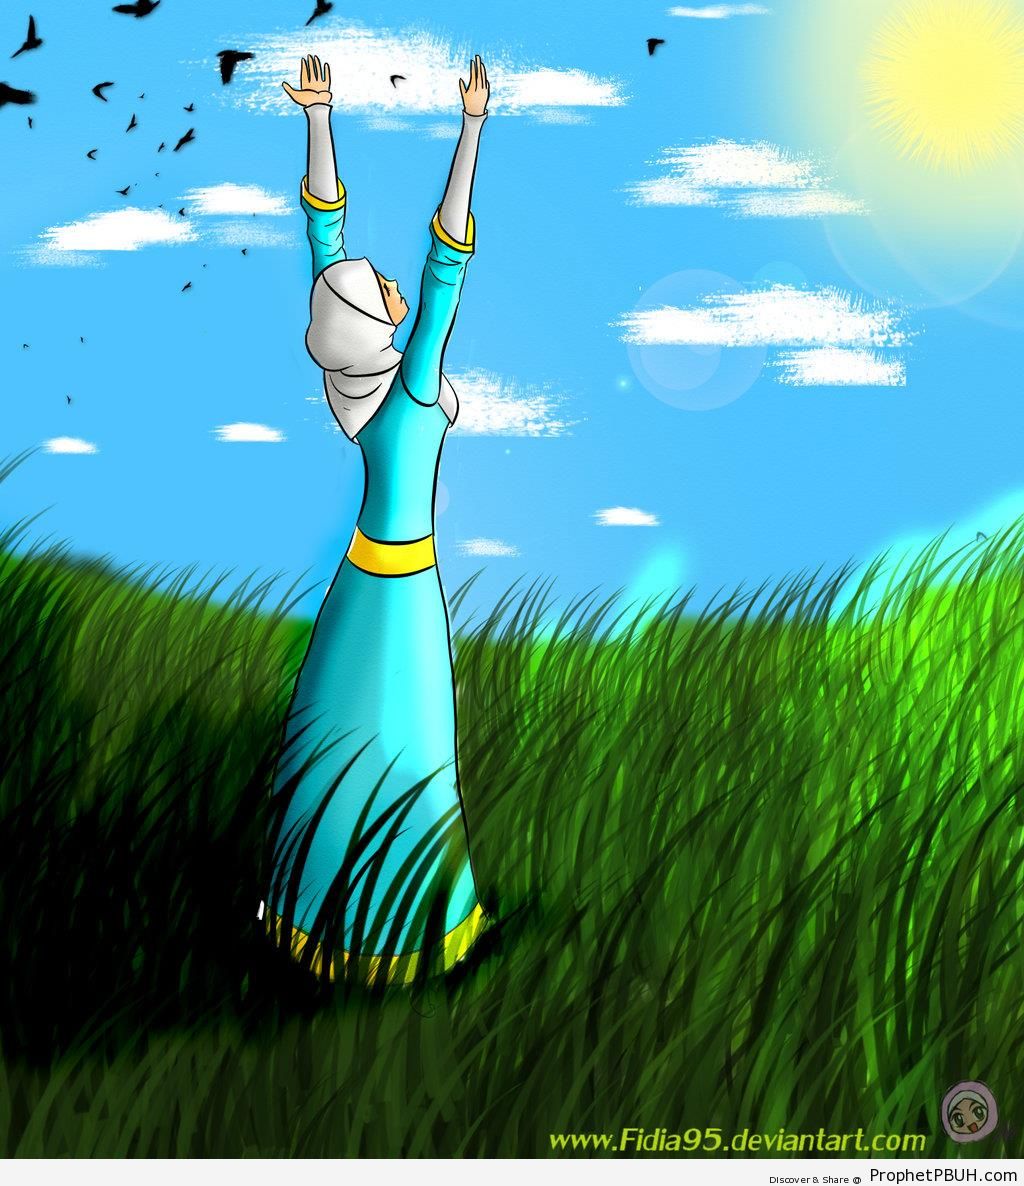 Muslimah in Sunny Green Field With Arms Raised to the Sky - Drawings 